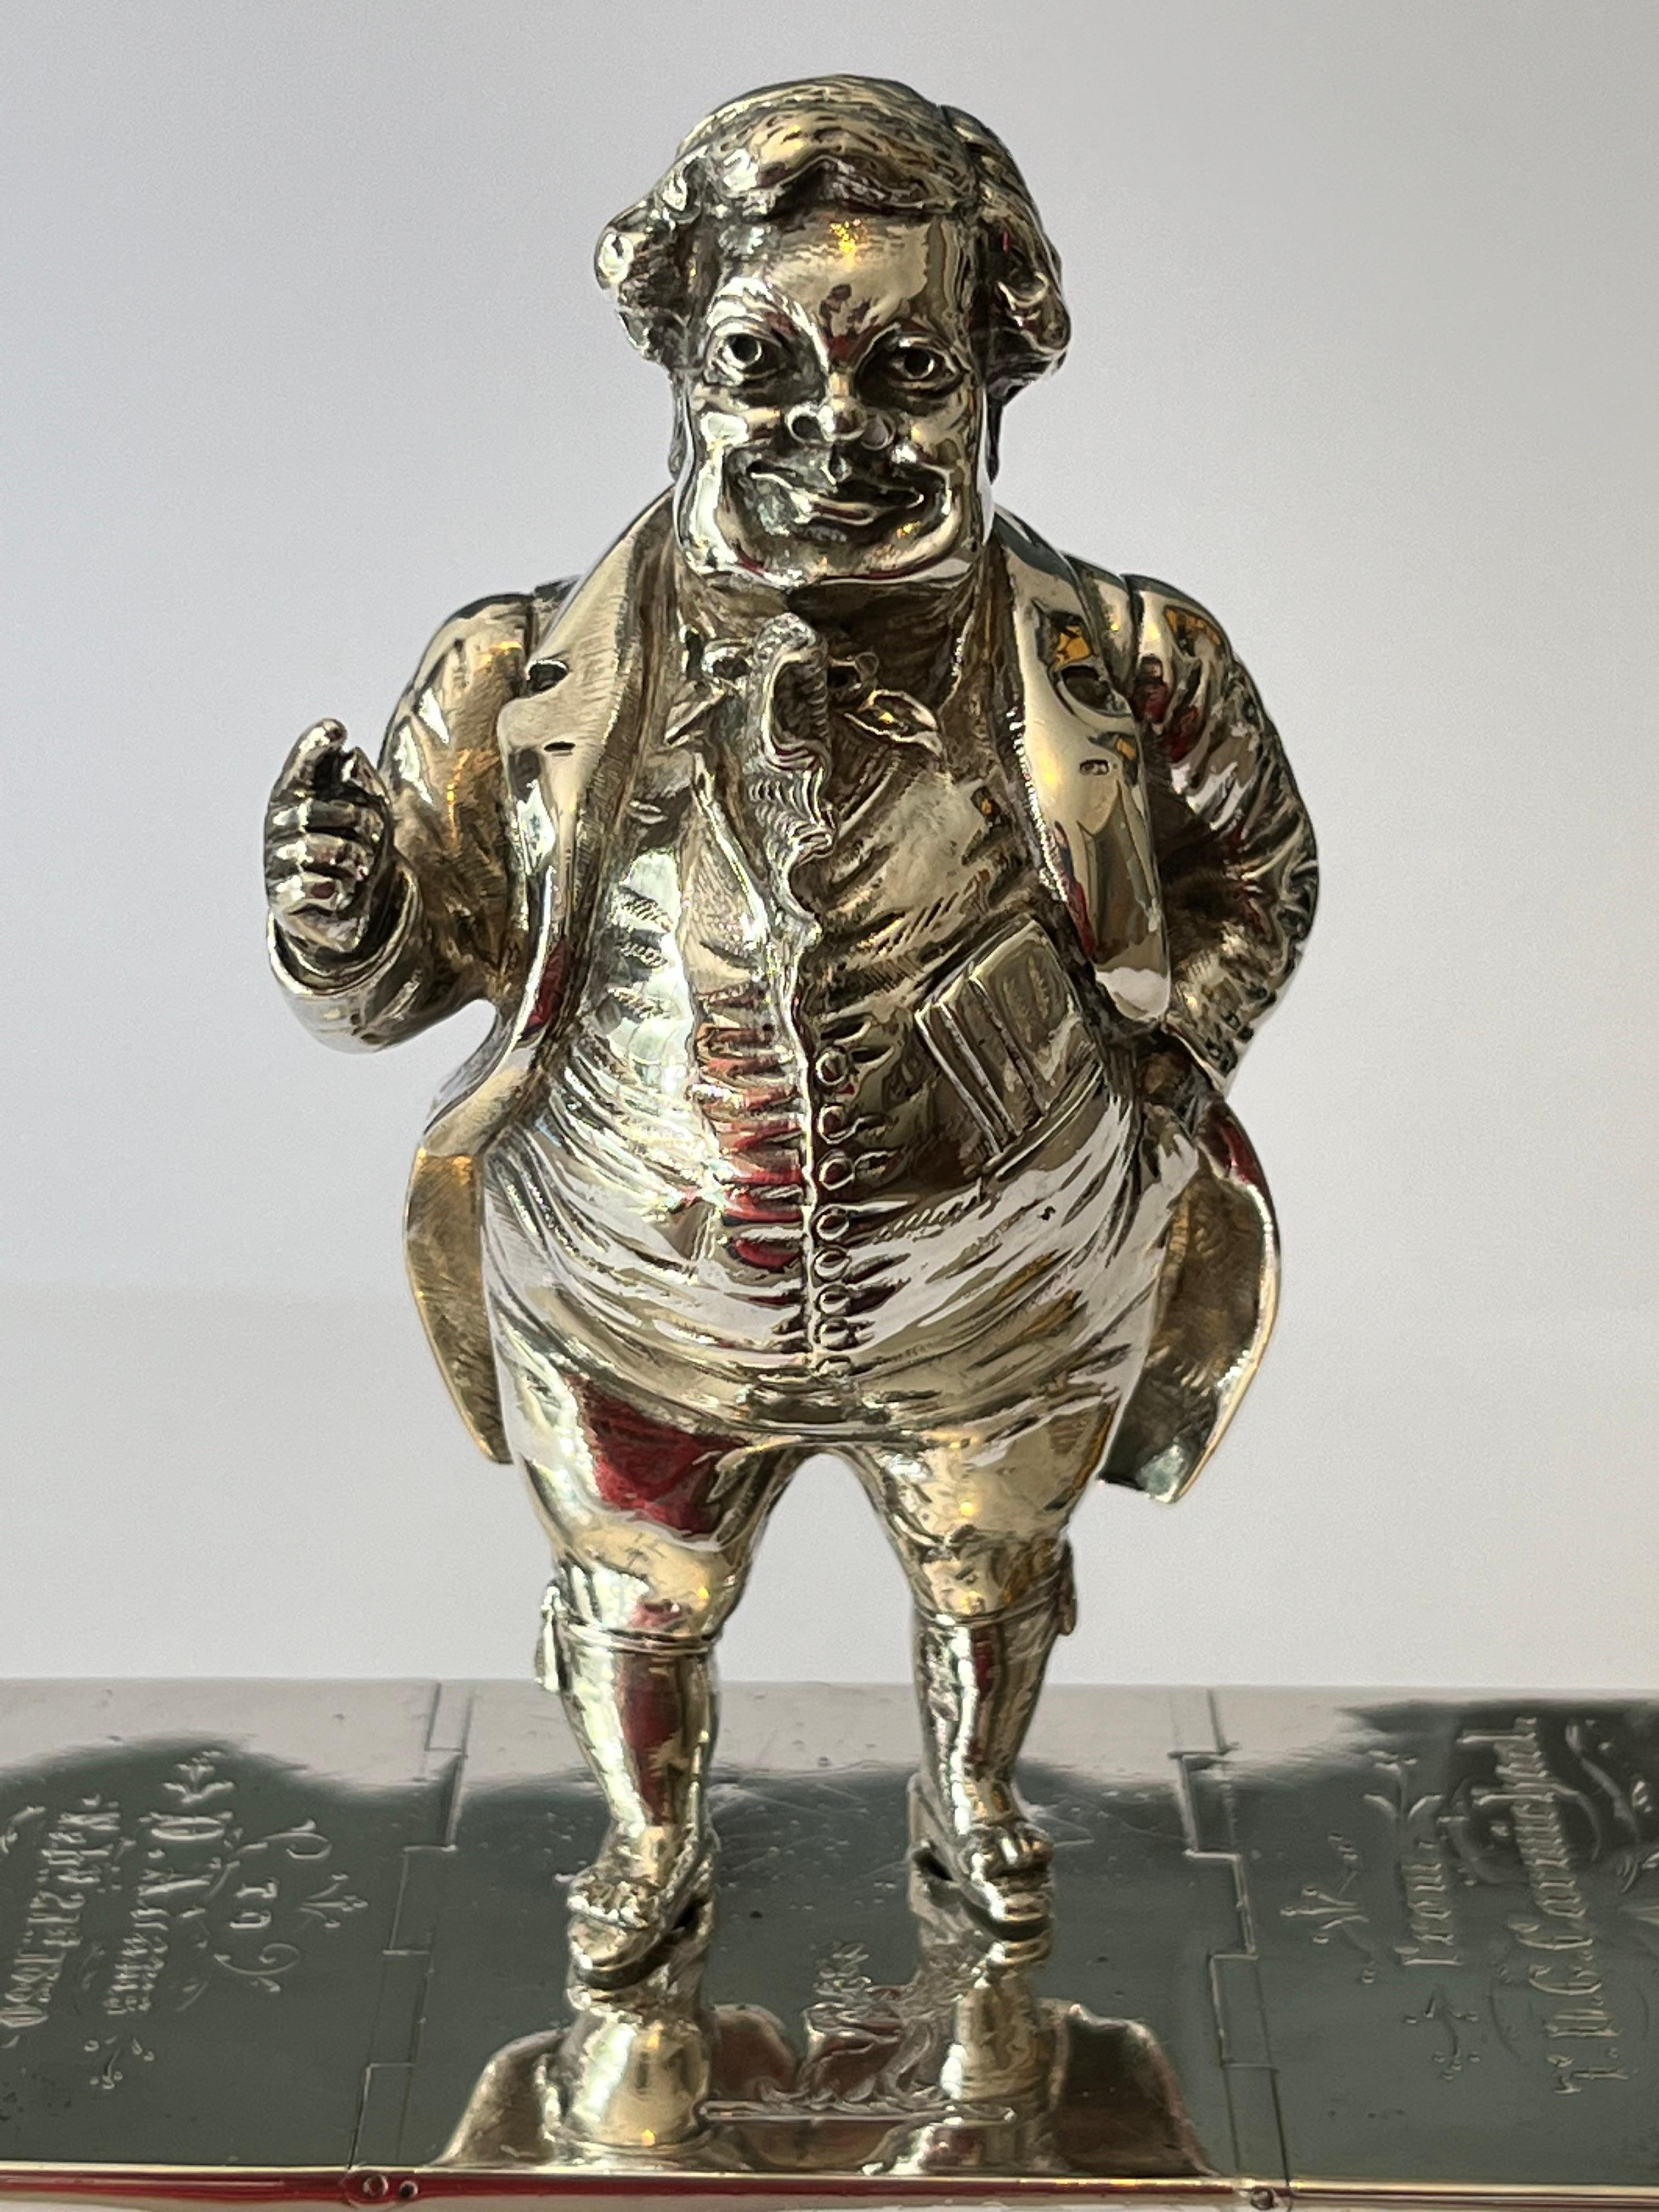 The Sporting lecture.
 
An extremely fine Victorian silver novelty cruet set, comprising a heavy gauge cast figural pepper modelled as the popular fictional comic sporting character, John Jorrocks Esq., atop a rectangular base with Dual hinged